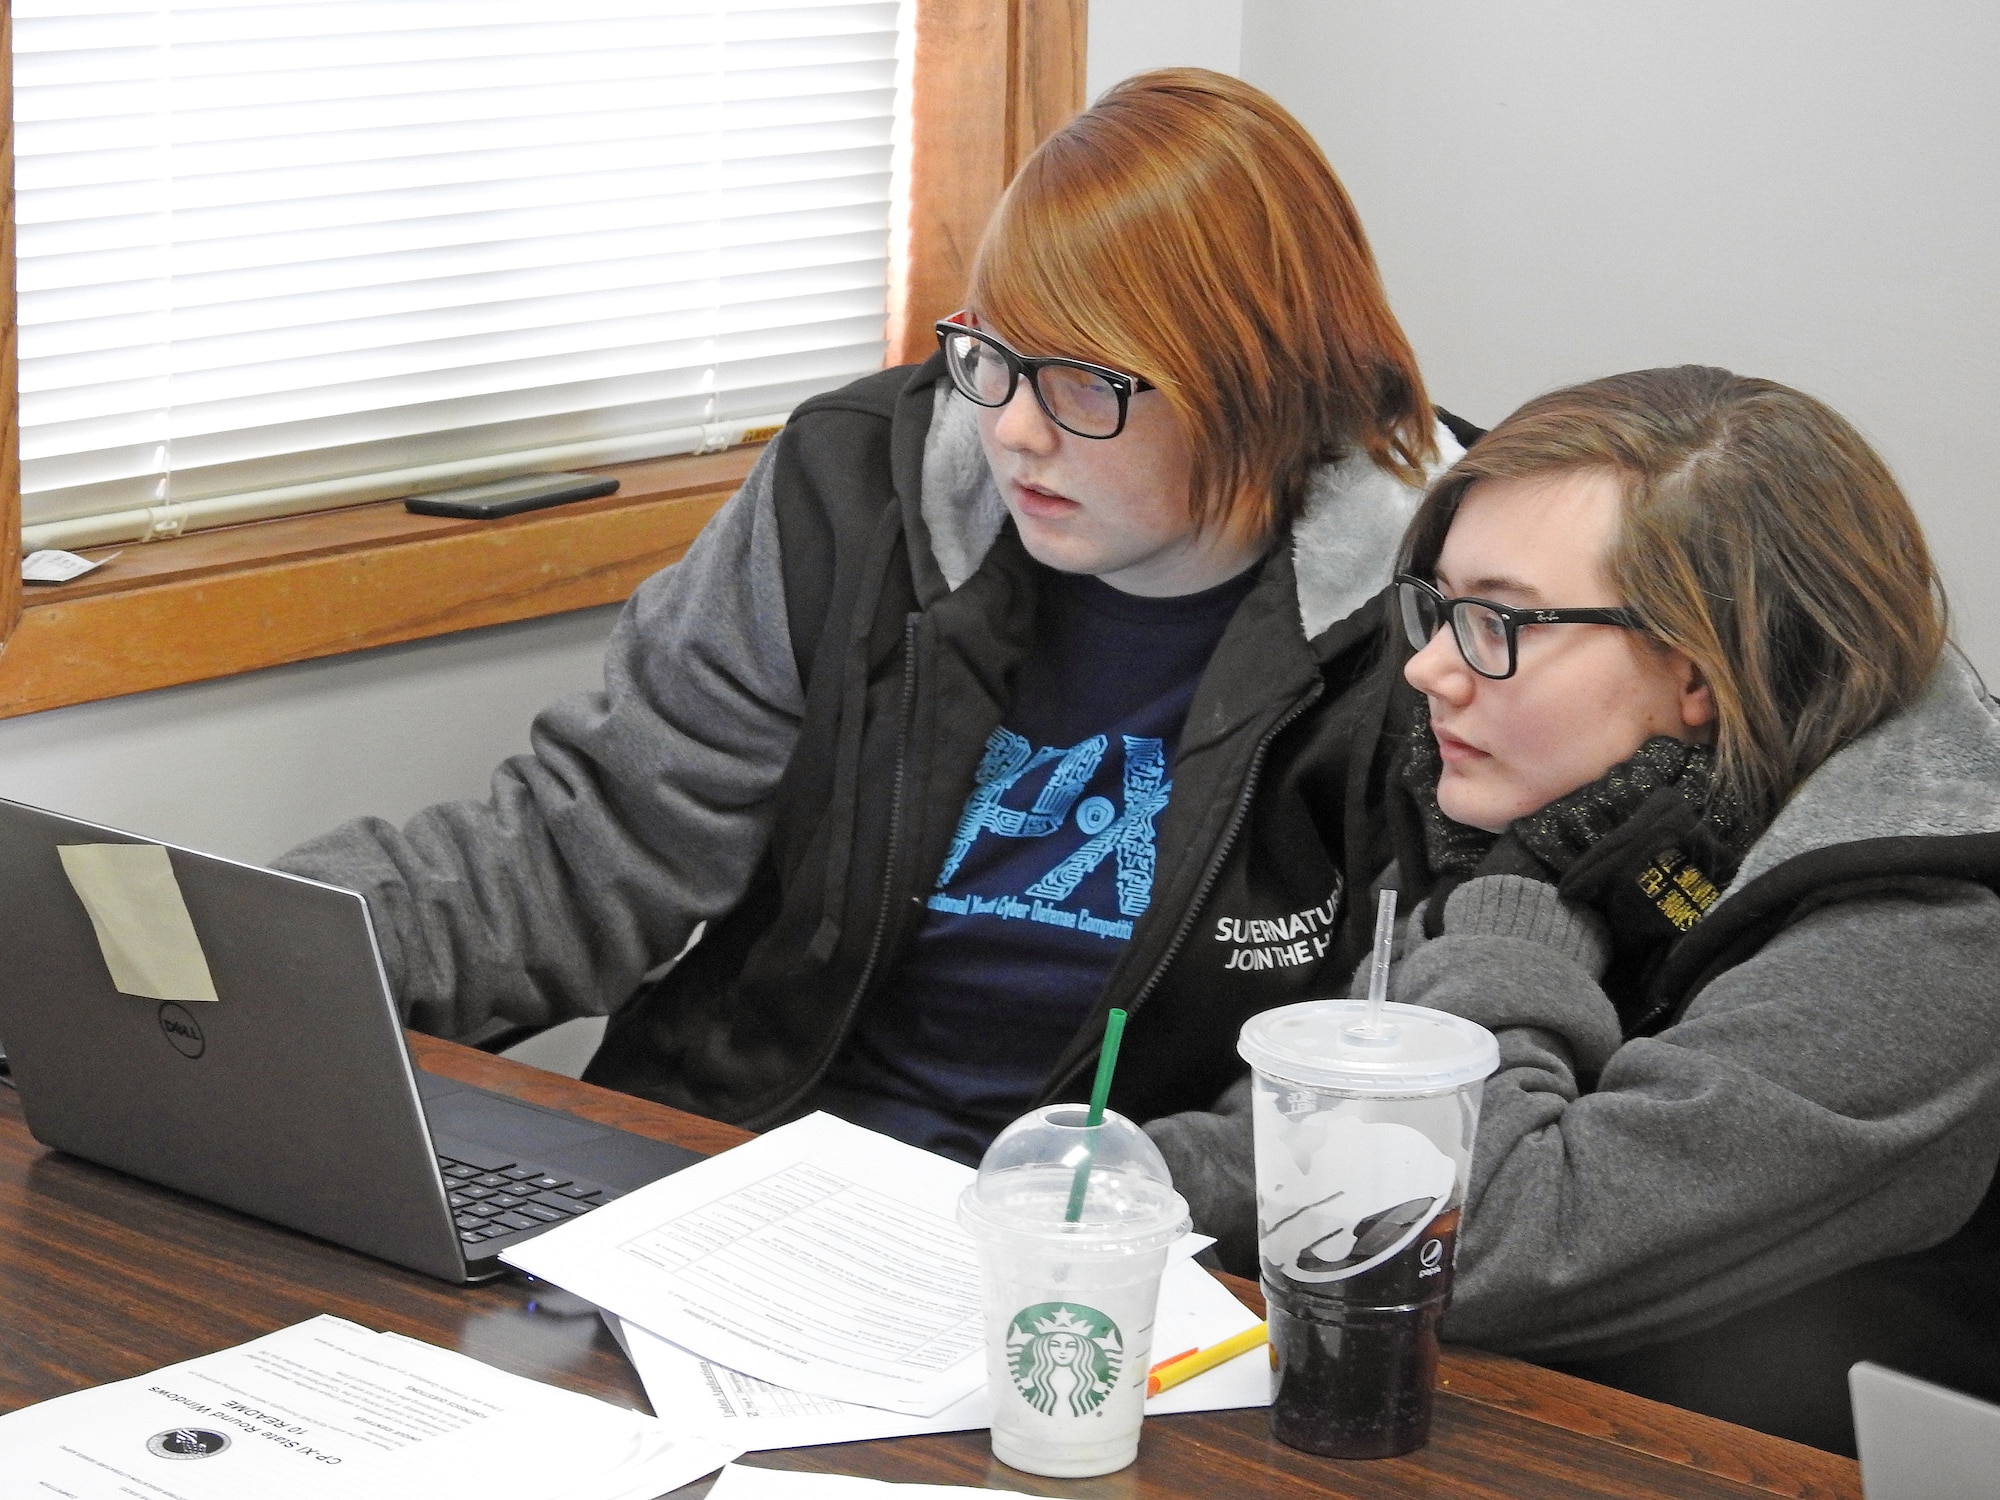 Civil Air Patrol Cadets Chief Master Sgt. Madeline Gorden and Senior Master Sgt. Cecelia Gorden look at a laptop screen Jan. 19, 2019, at the Curtis E. Lemay Civil Air Patrol Composite Squadron on Offutt Air Force Base, Neb. The squadron took part in the National CyberPatriot Competition, an event designed to inspire students toward careers in cybersecurity or other science, technology, engineering, and mathematics disciplines critical to our nation's future. (U.S. Air Force photo by Dave Farley)